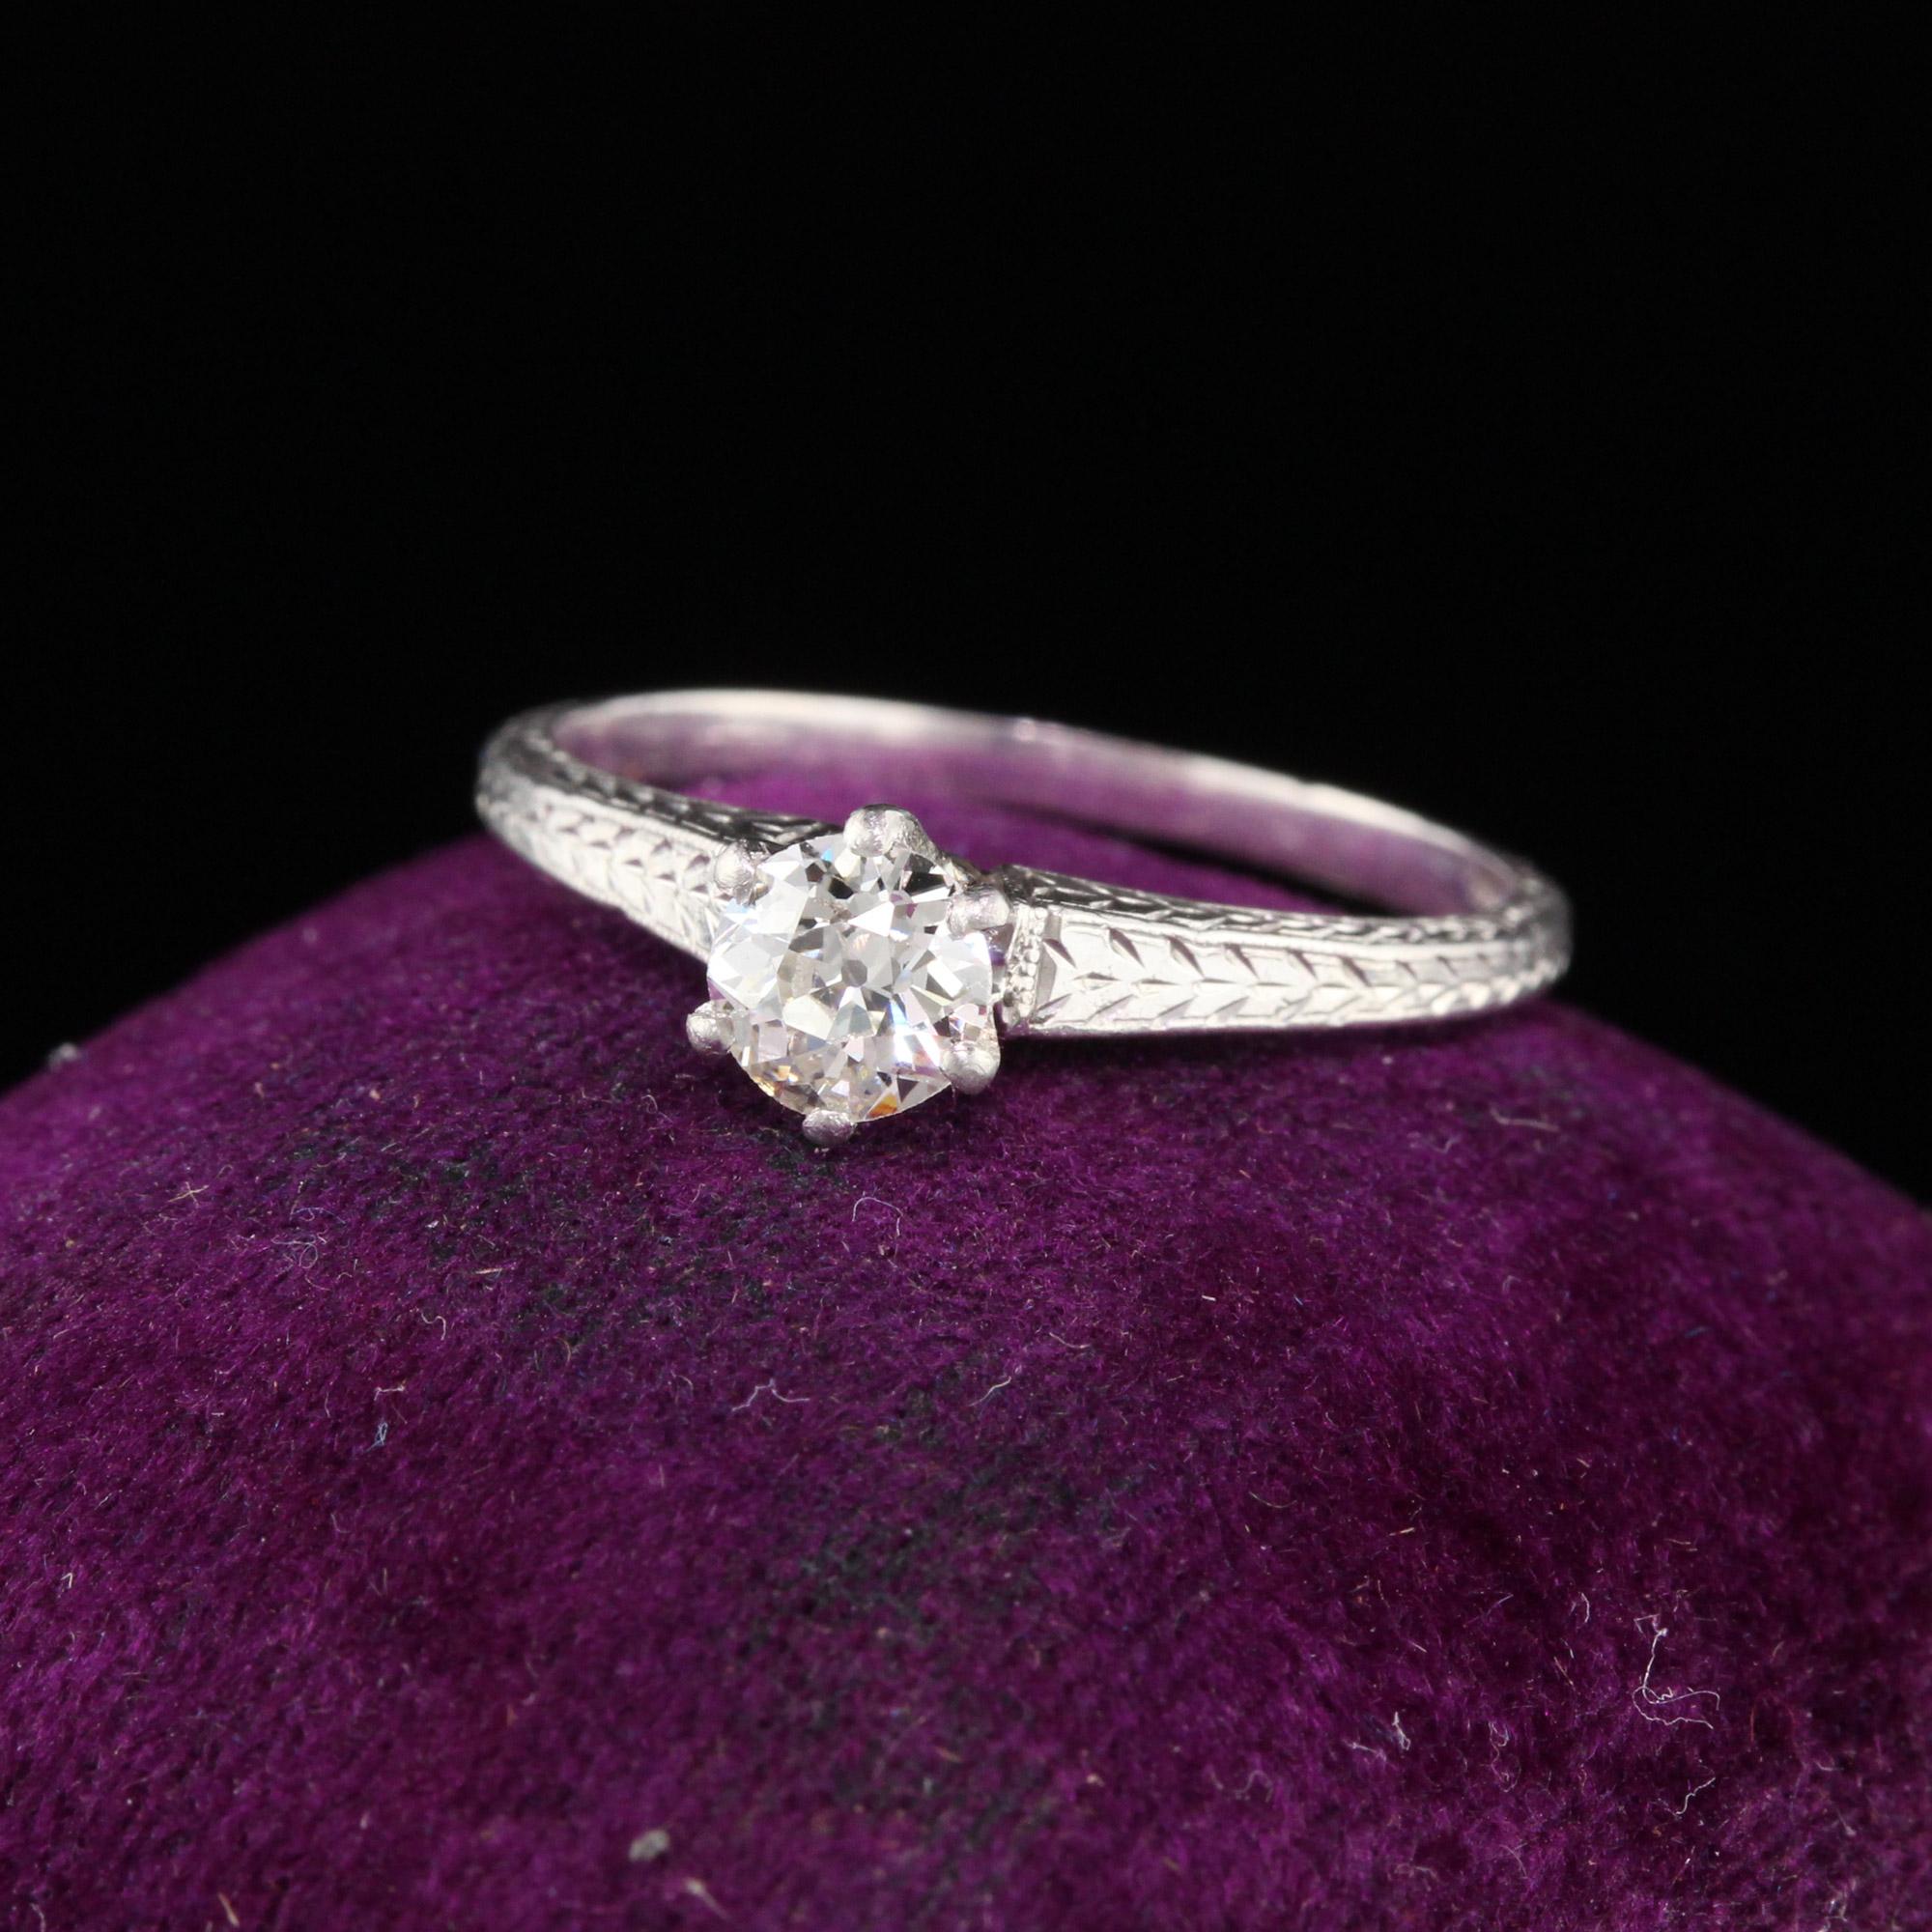 Gorgeous Art Deco solitaire engagement ring done in platinum with an old european cut diamond in the center. Crisp arrow engravings adorn the shank almost all the way around.

#R0288

Metal: Platinum

Weight: 3.1 Grams

Center Diamond Weight: 0.43